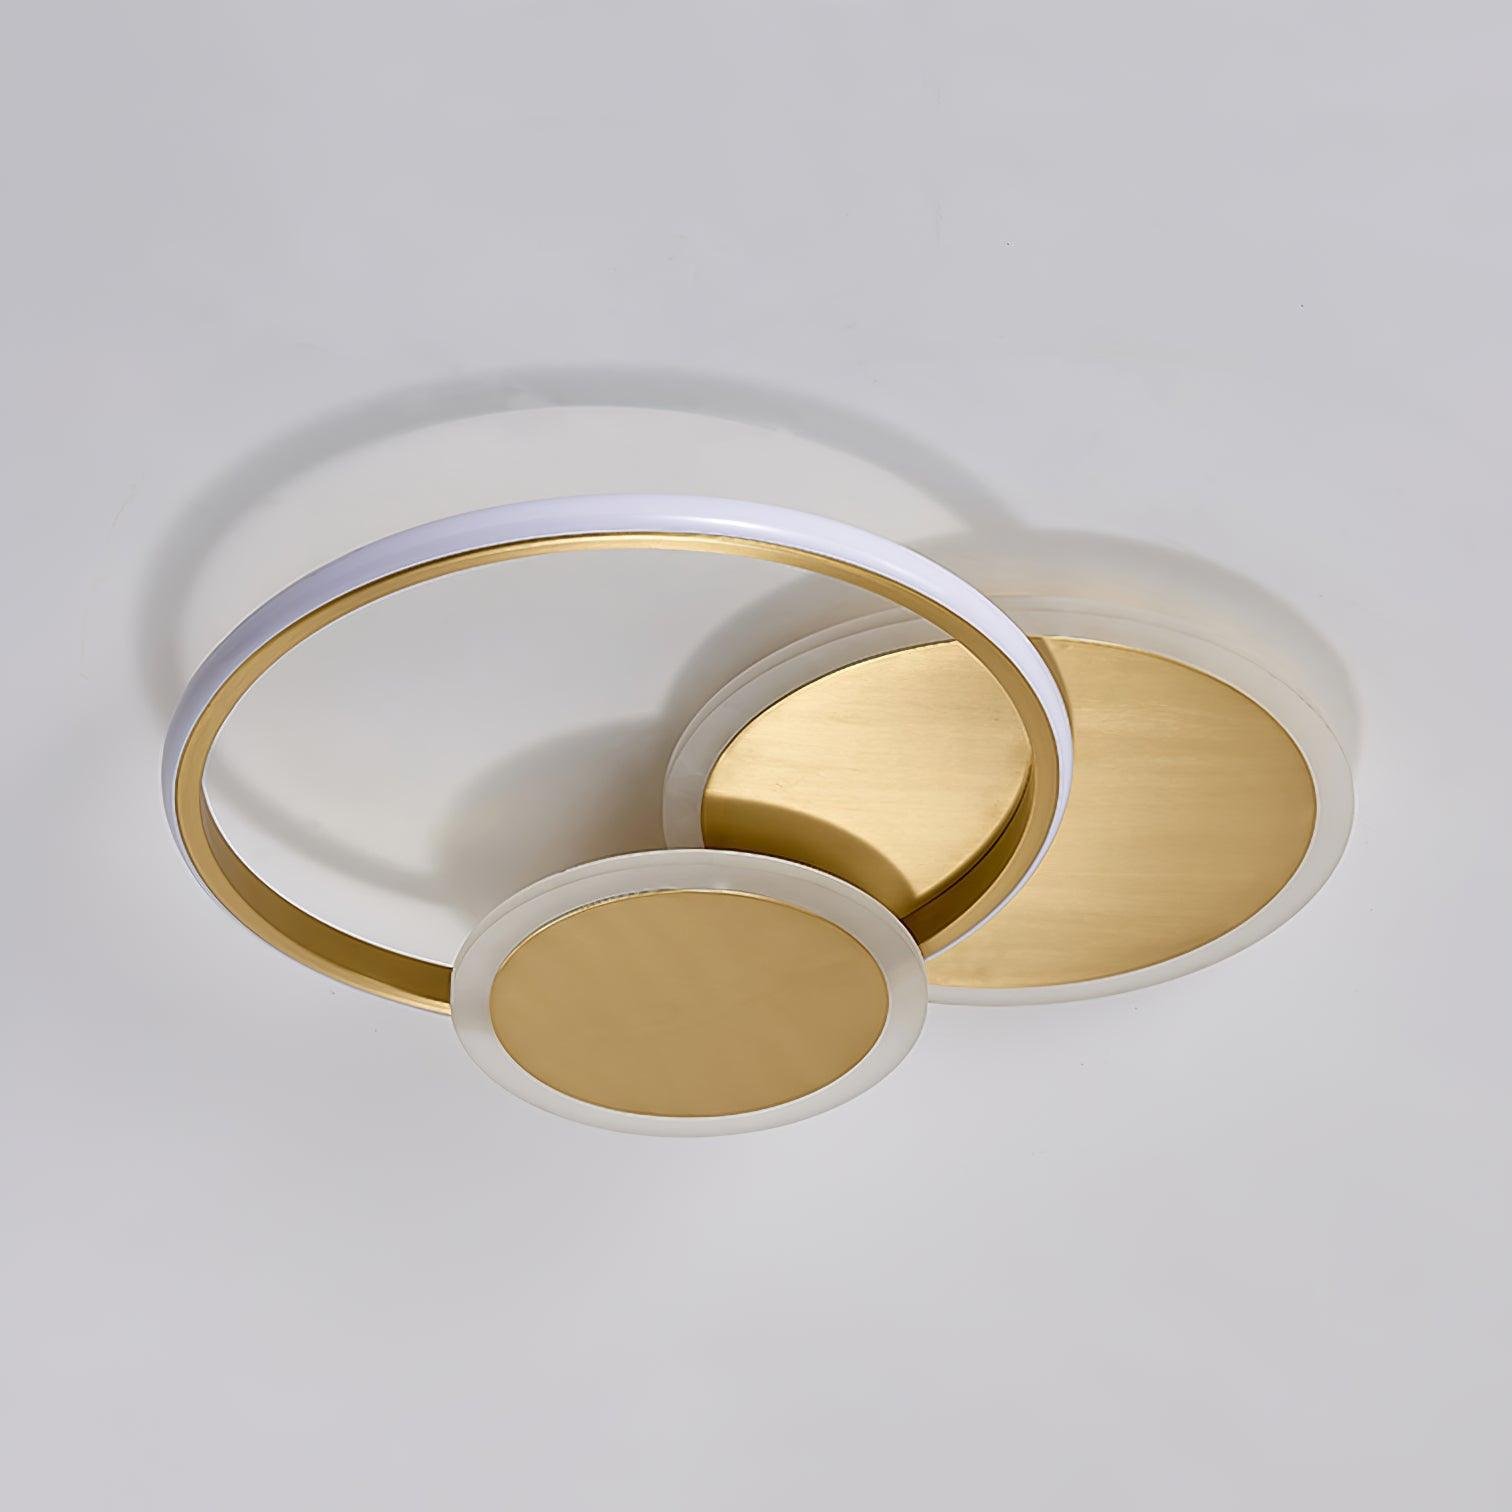 Brass LED Ceiling Light with Circle Design, Dimensions 20.5″ x 20.5″ x 2.4″ (52cm x 52cm x 6cm), Provides Three-Color Changing Illumination